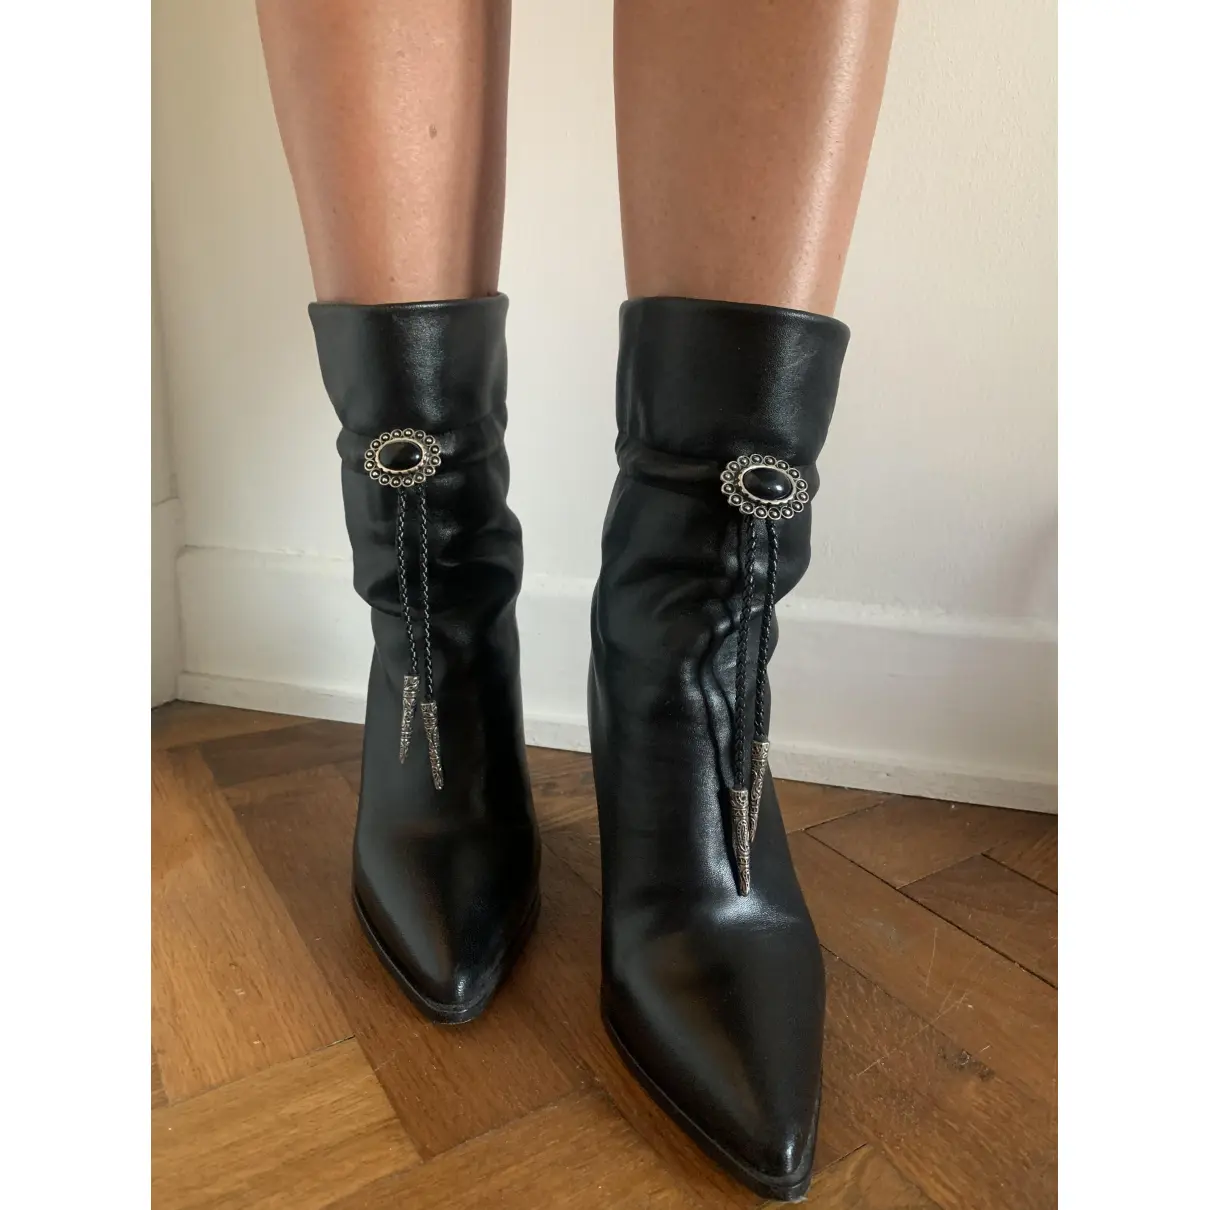 Buy The Kooples Fall Winter 2019 leather western boots online